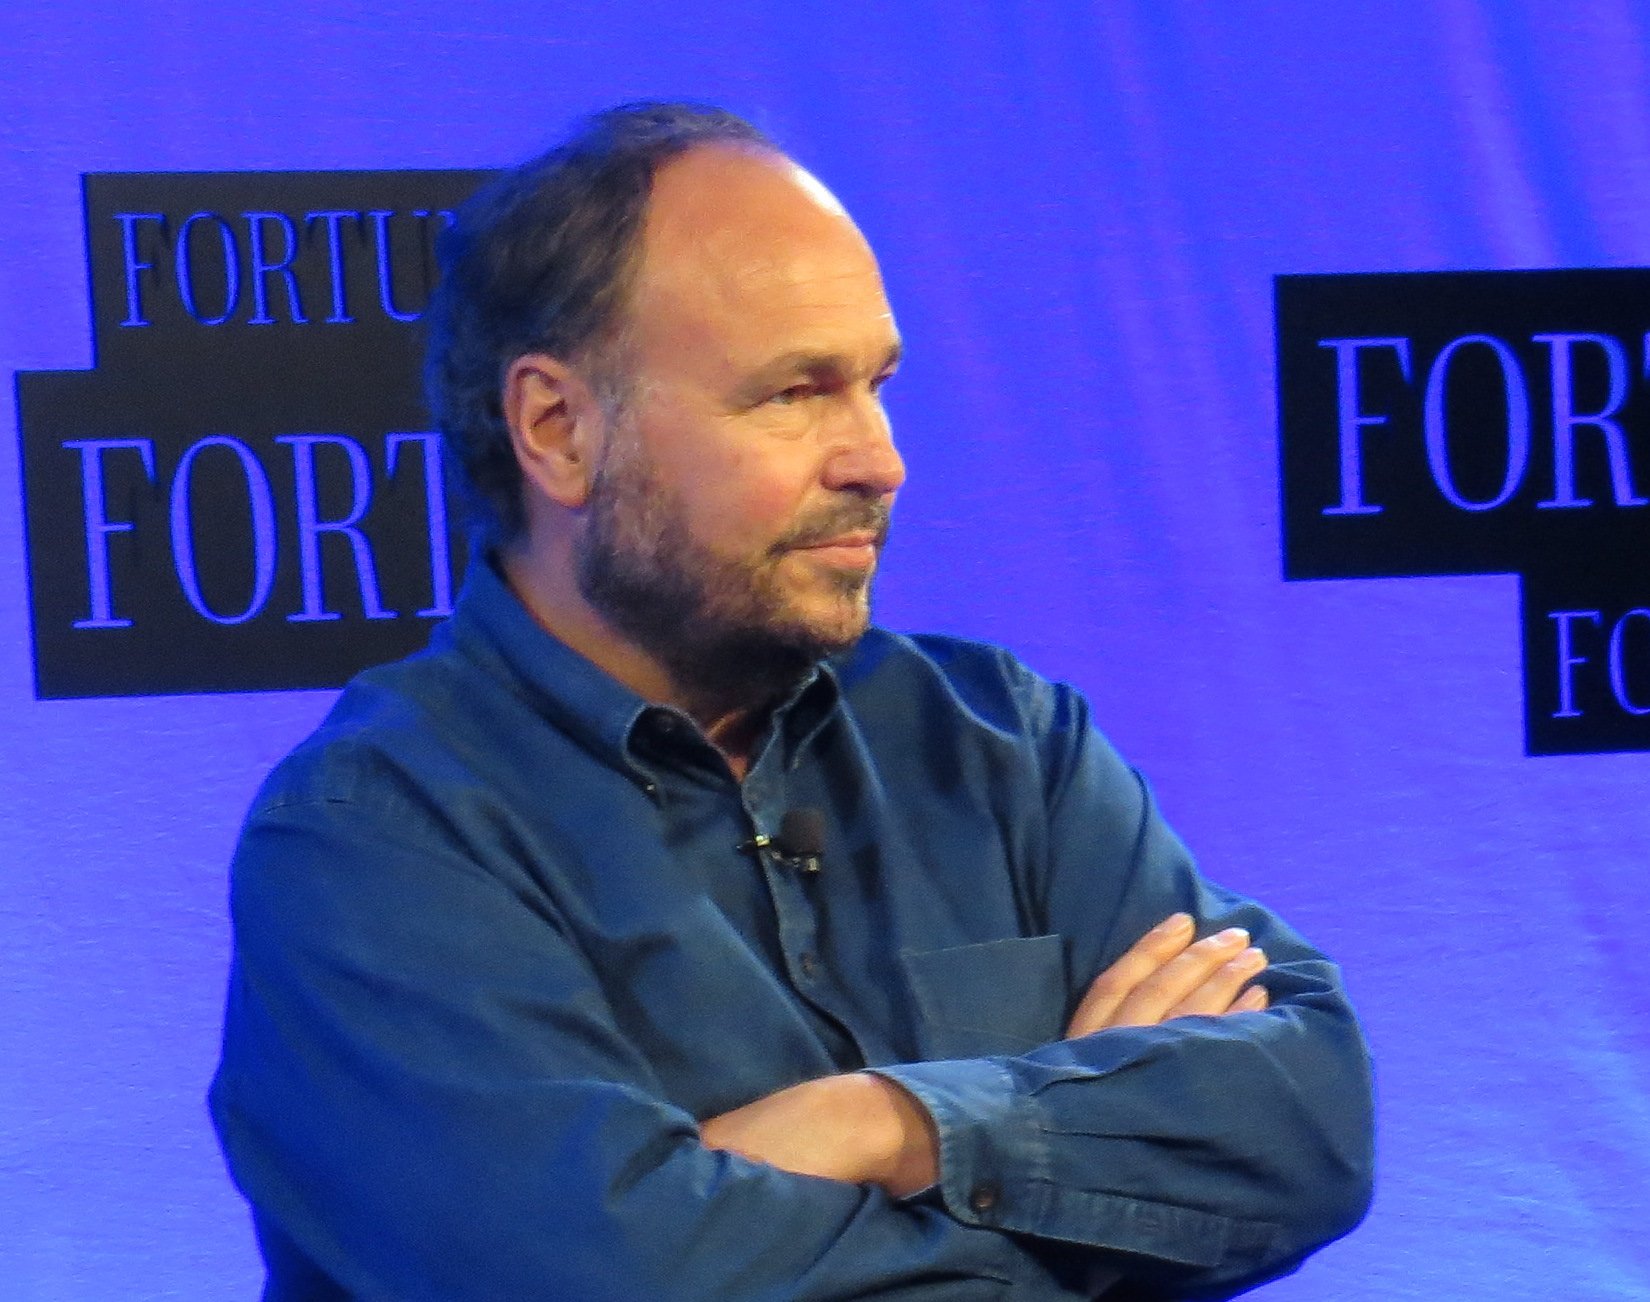 Pivotal Software CEO Paul Maritz just stepped down after building a